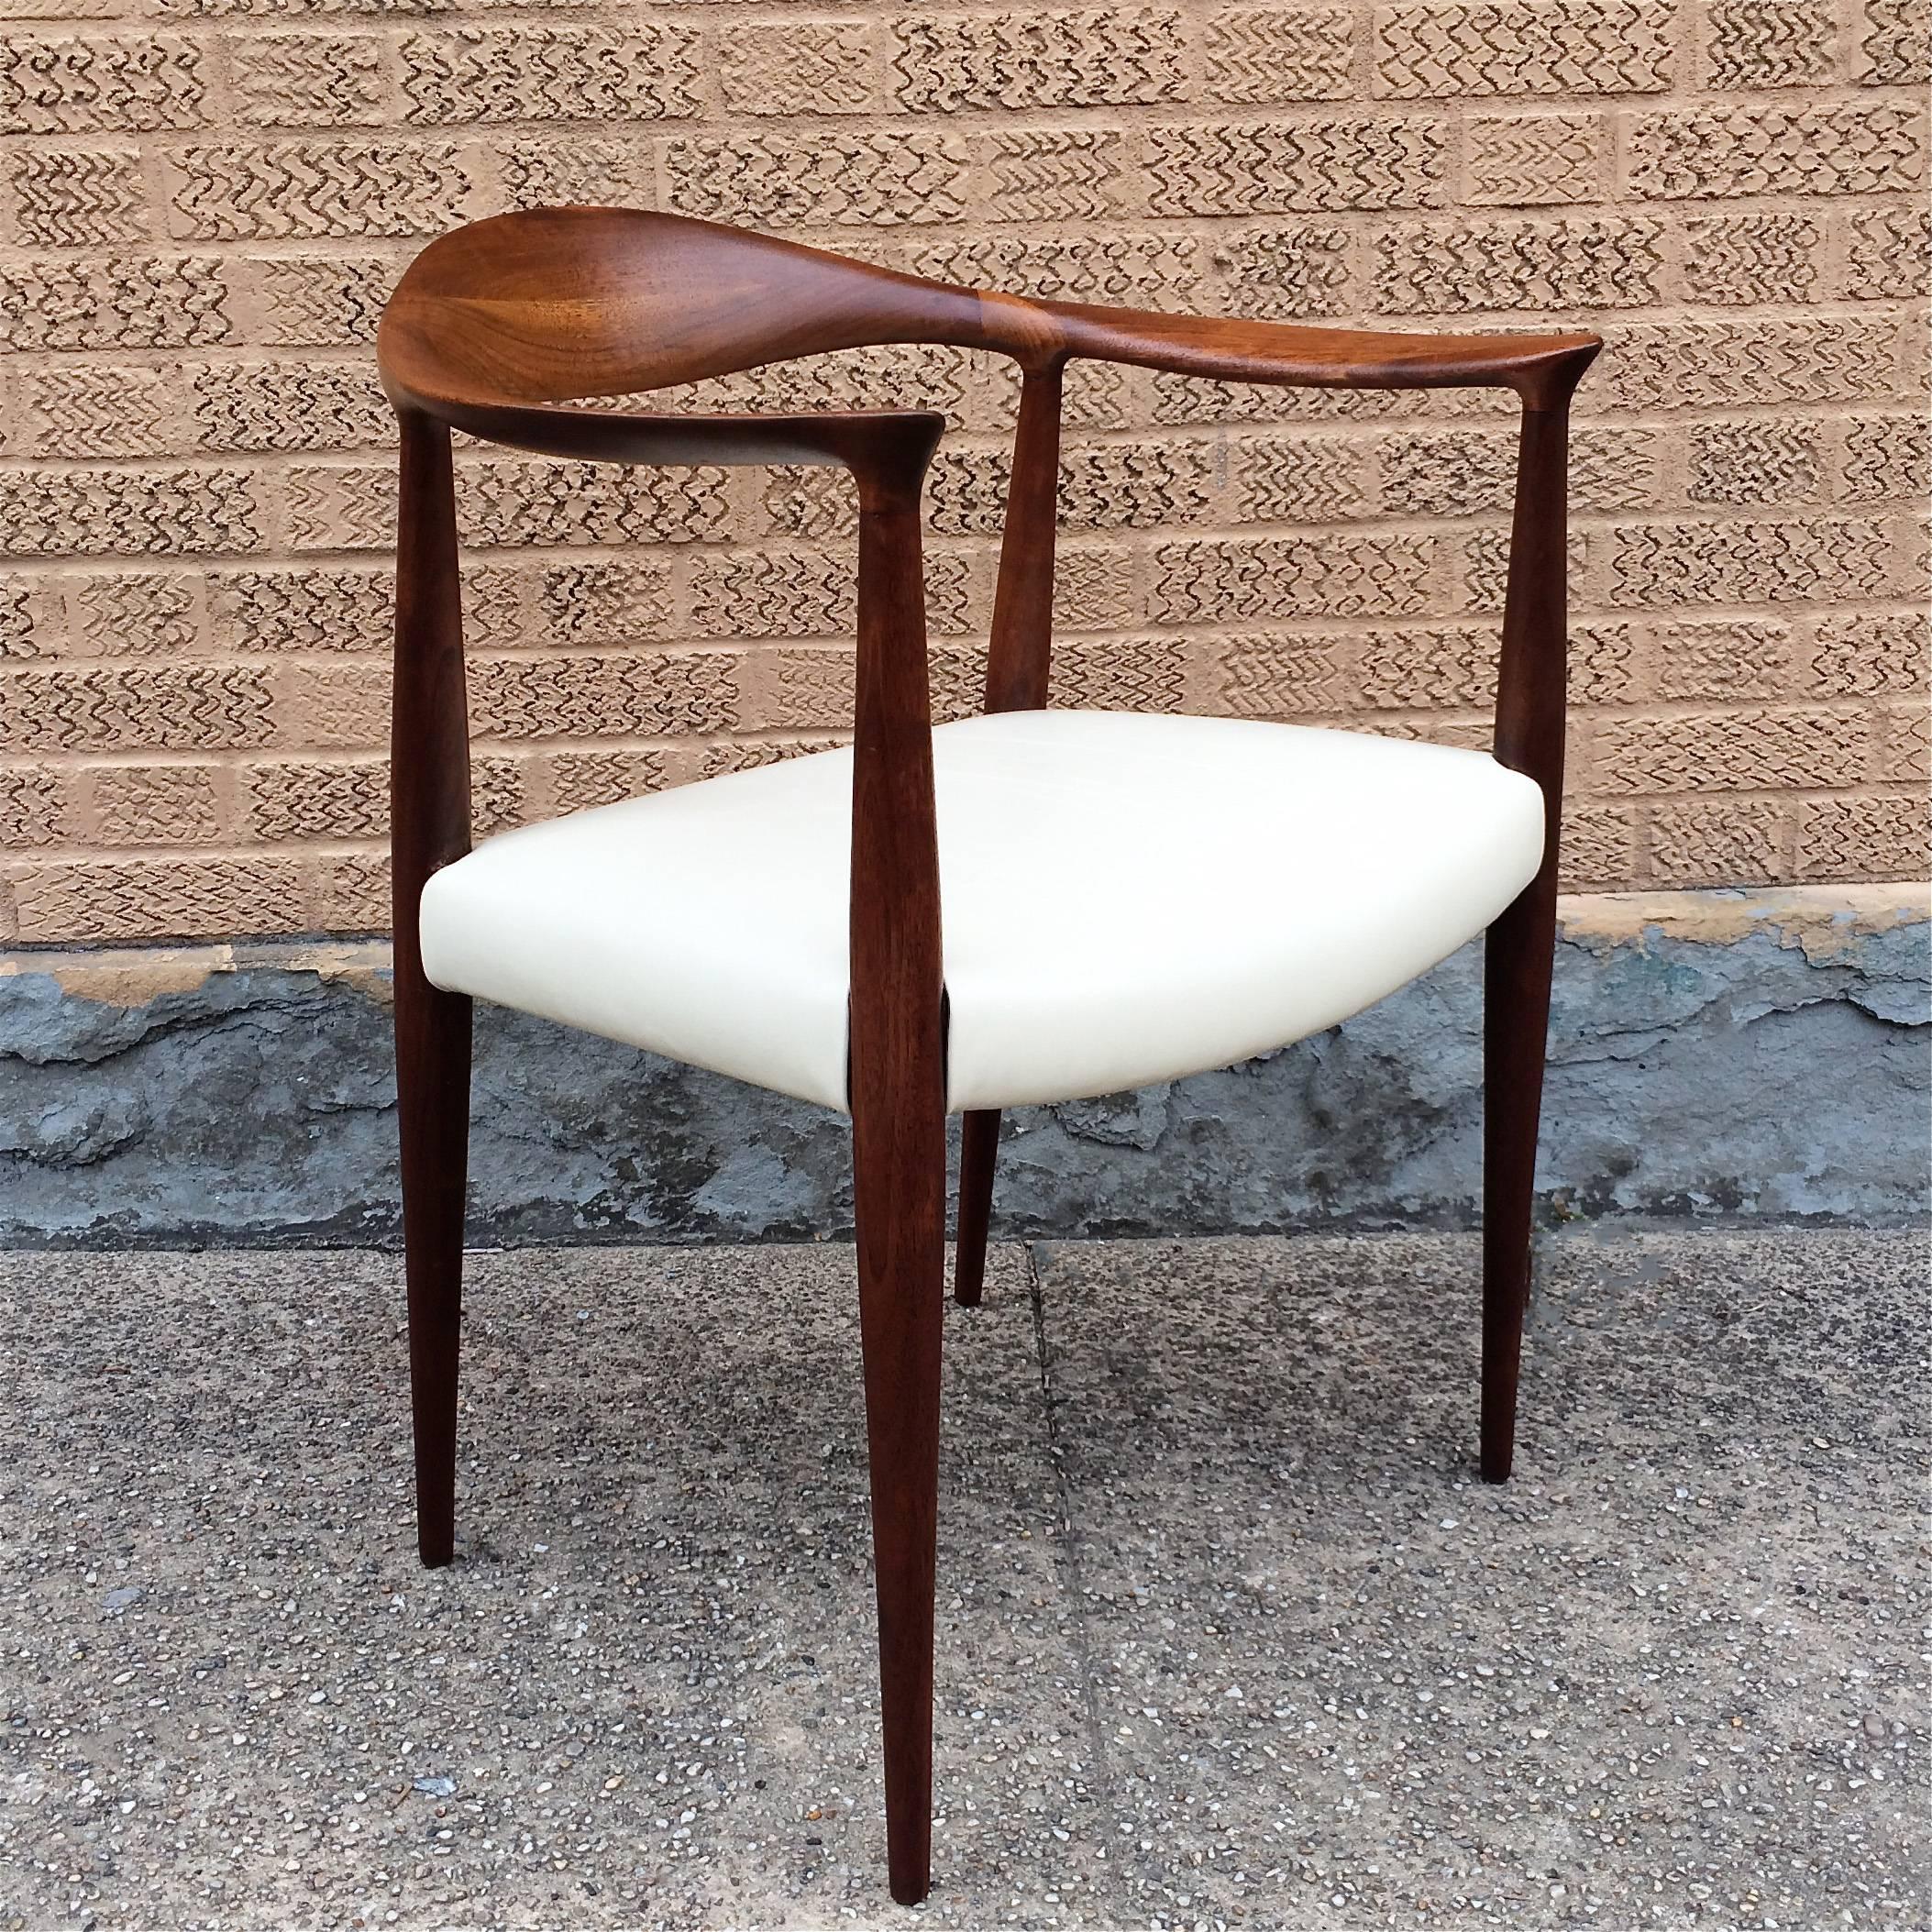 Mid-Century Modern, armchair that has a sculpted walnut frame and leather seat.